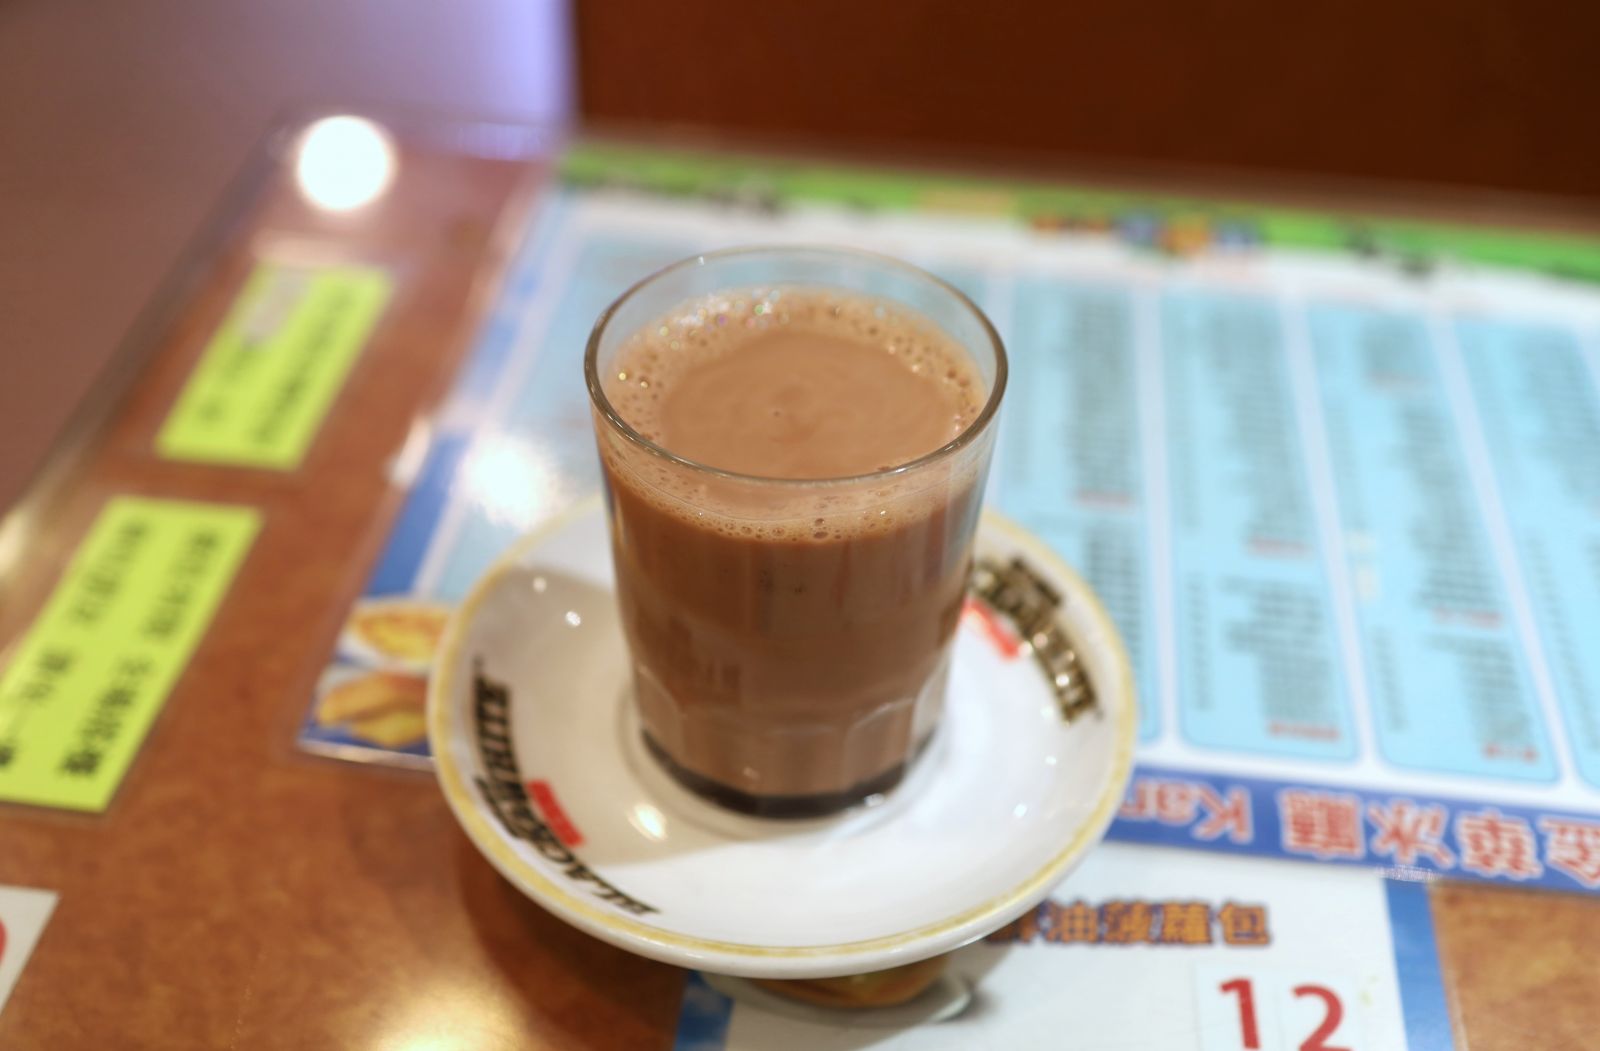 Don't forget to order a cup of milk tea following your meal